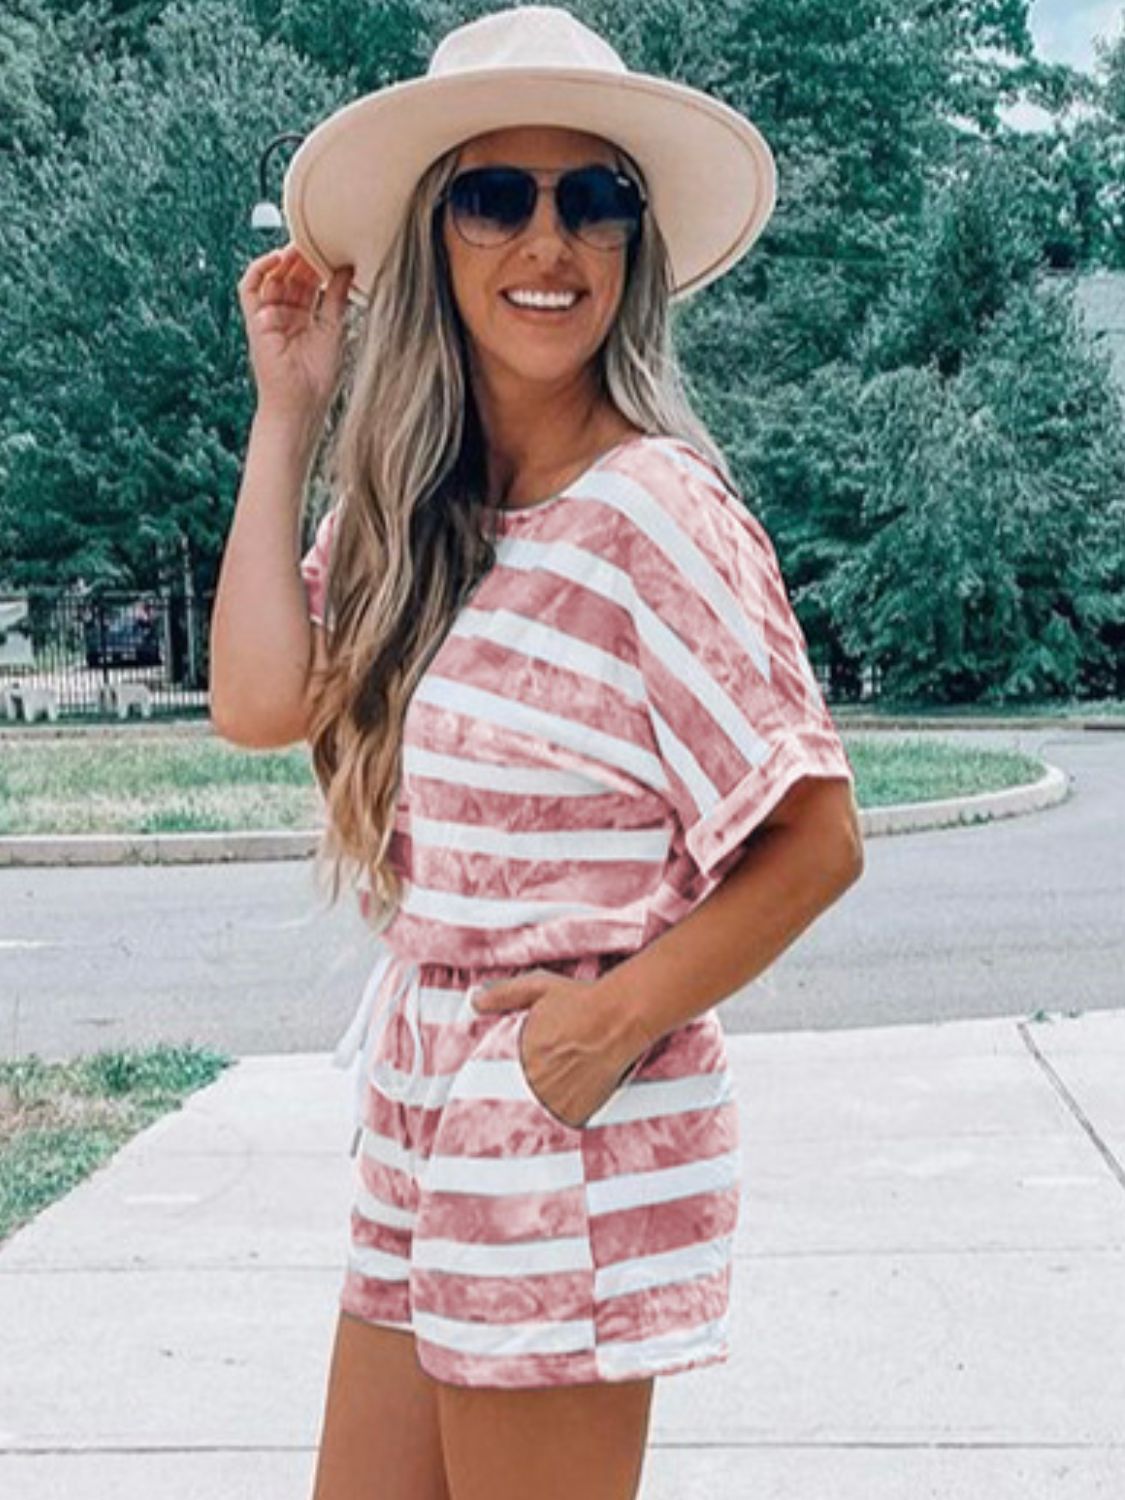 PREORDER- Striped Round Neck Top and Shorts Set